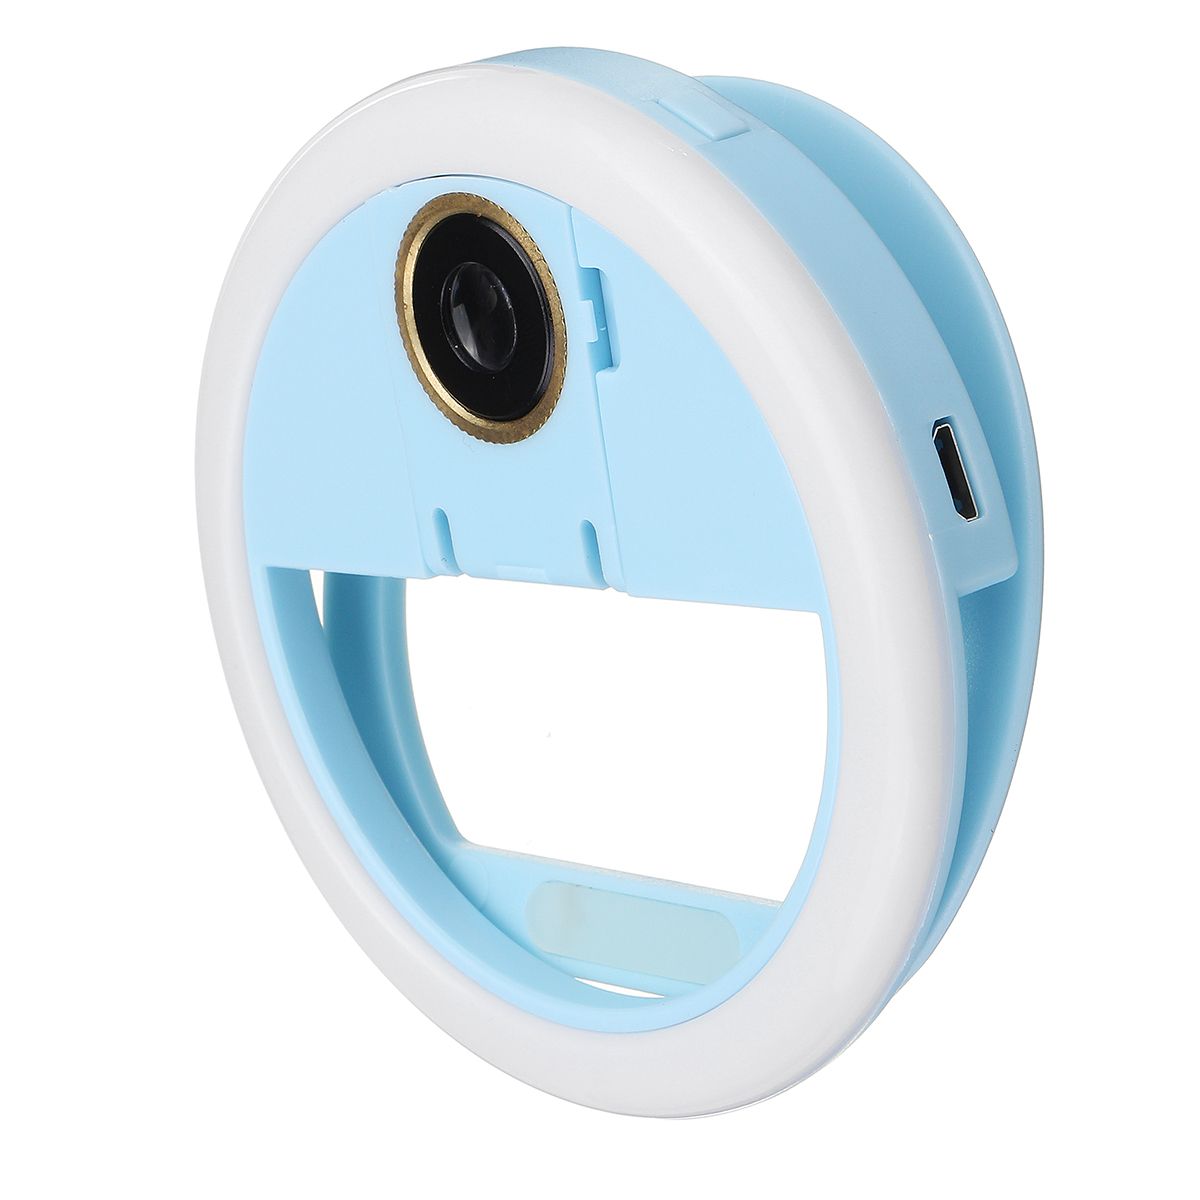 Universal-Selfie-LED-Ring-Flash-063x-Wide-Angle-Macro-Phone-External-Lens-Camera-for-Cell-Phone-1633420